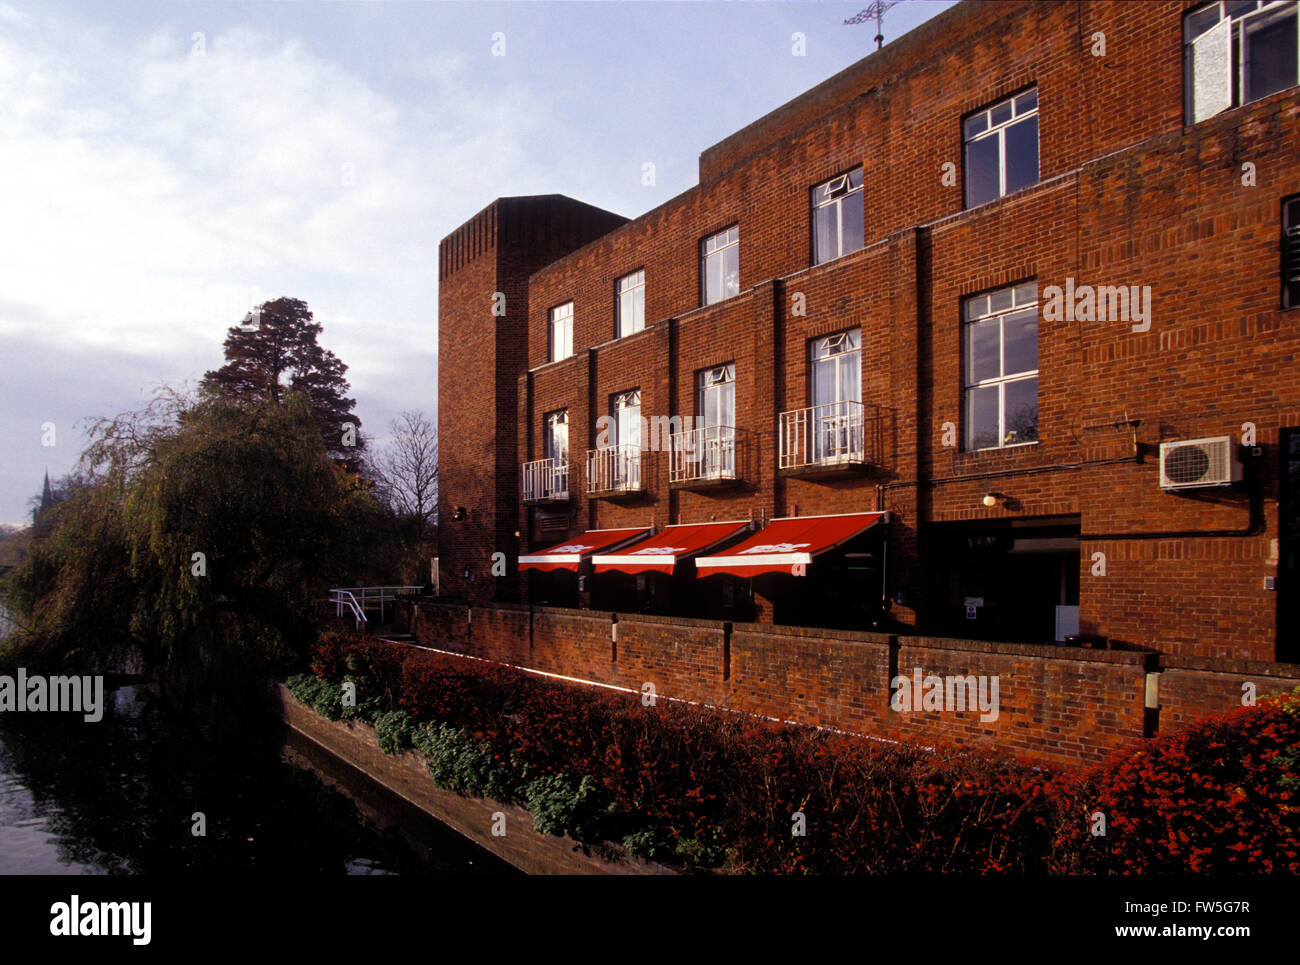 Royal Shakespeare Theatre - exterior view of the Royal Shakespeare Company (RSC) Theatre next to the River Avon, Stock Photo